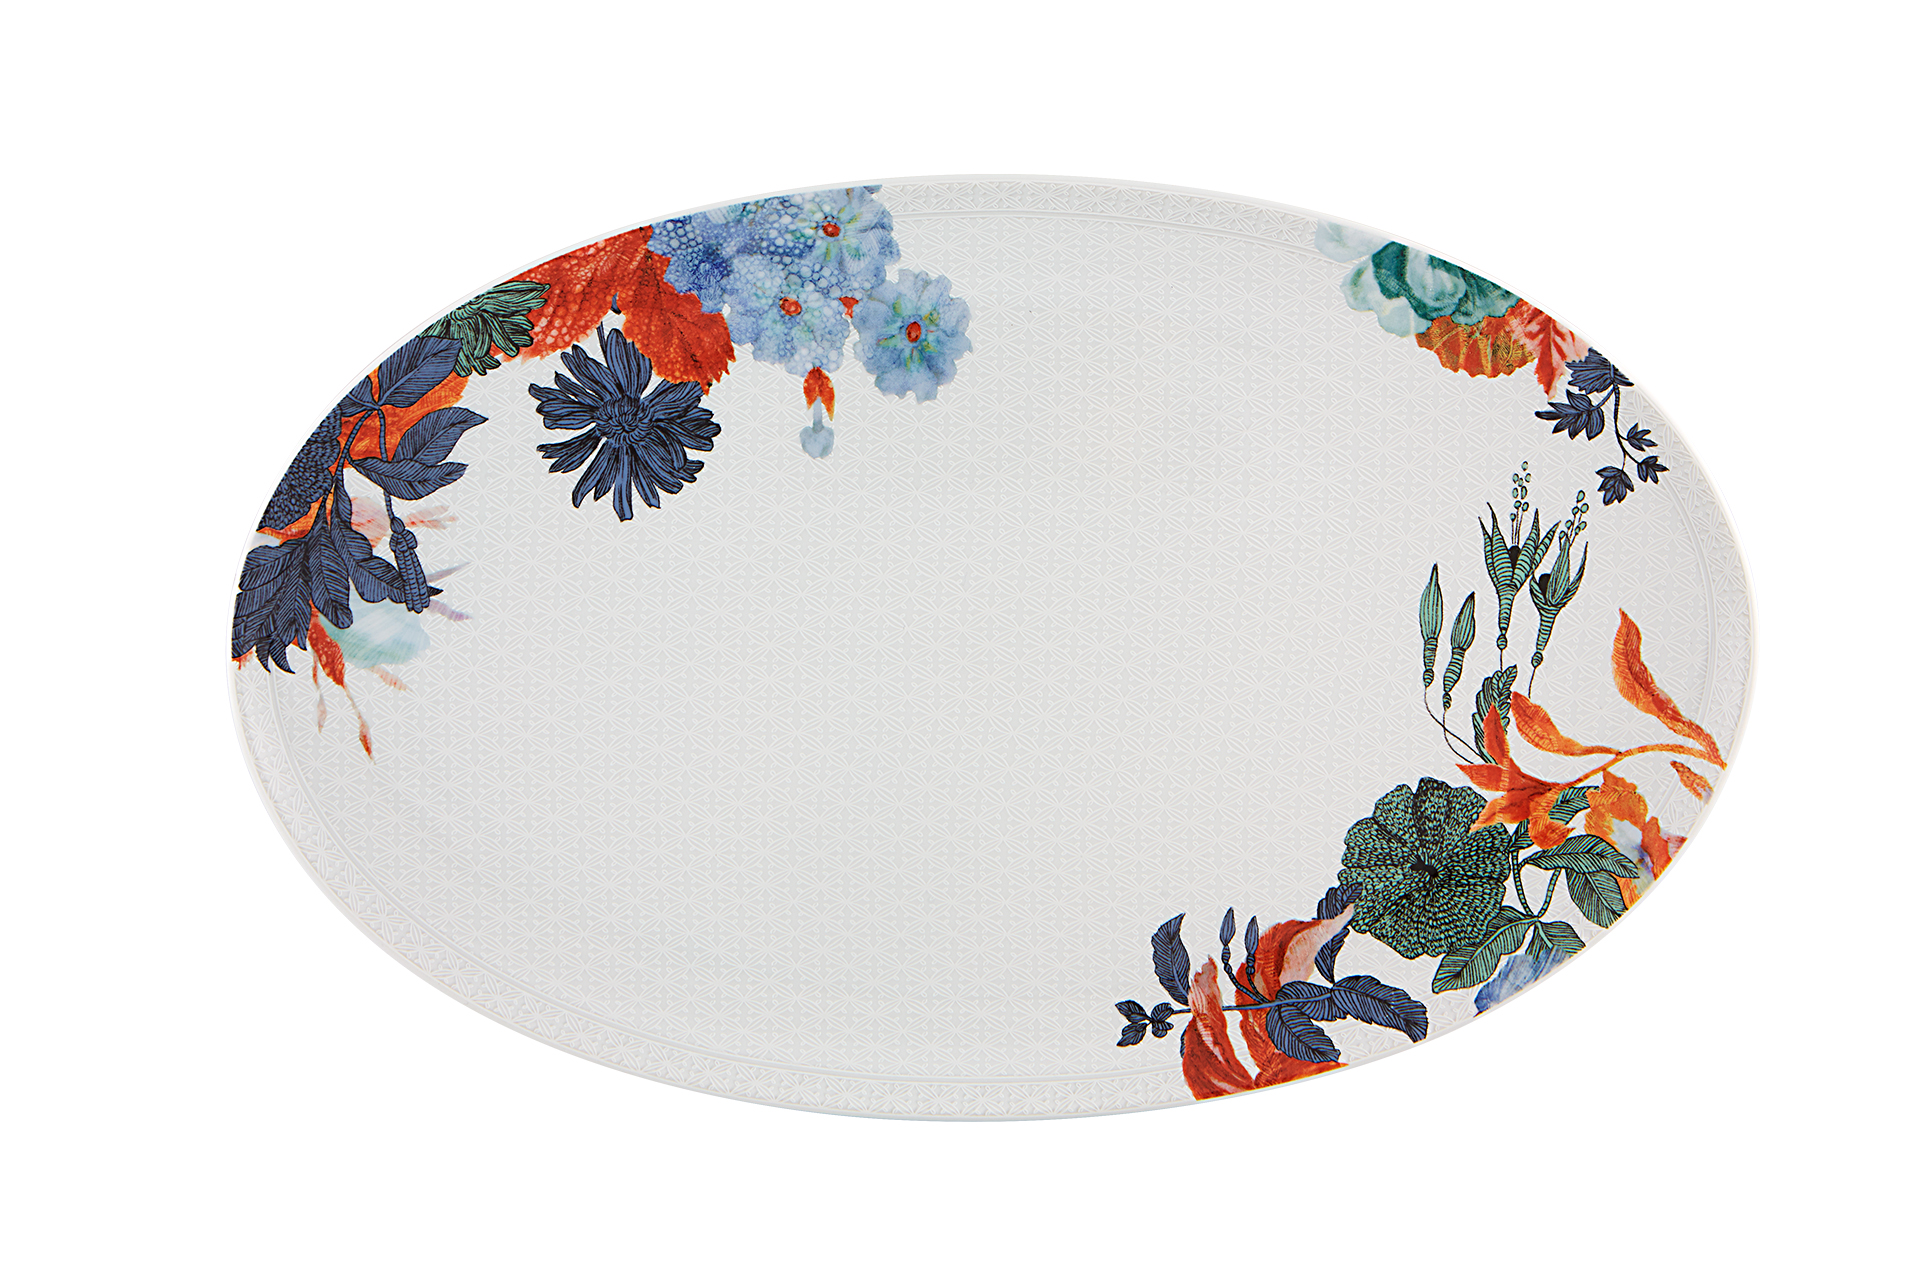 Large Oval Plate Vista Alegre Duality Collection